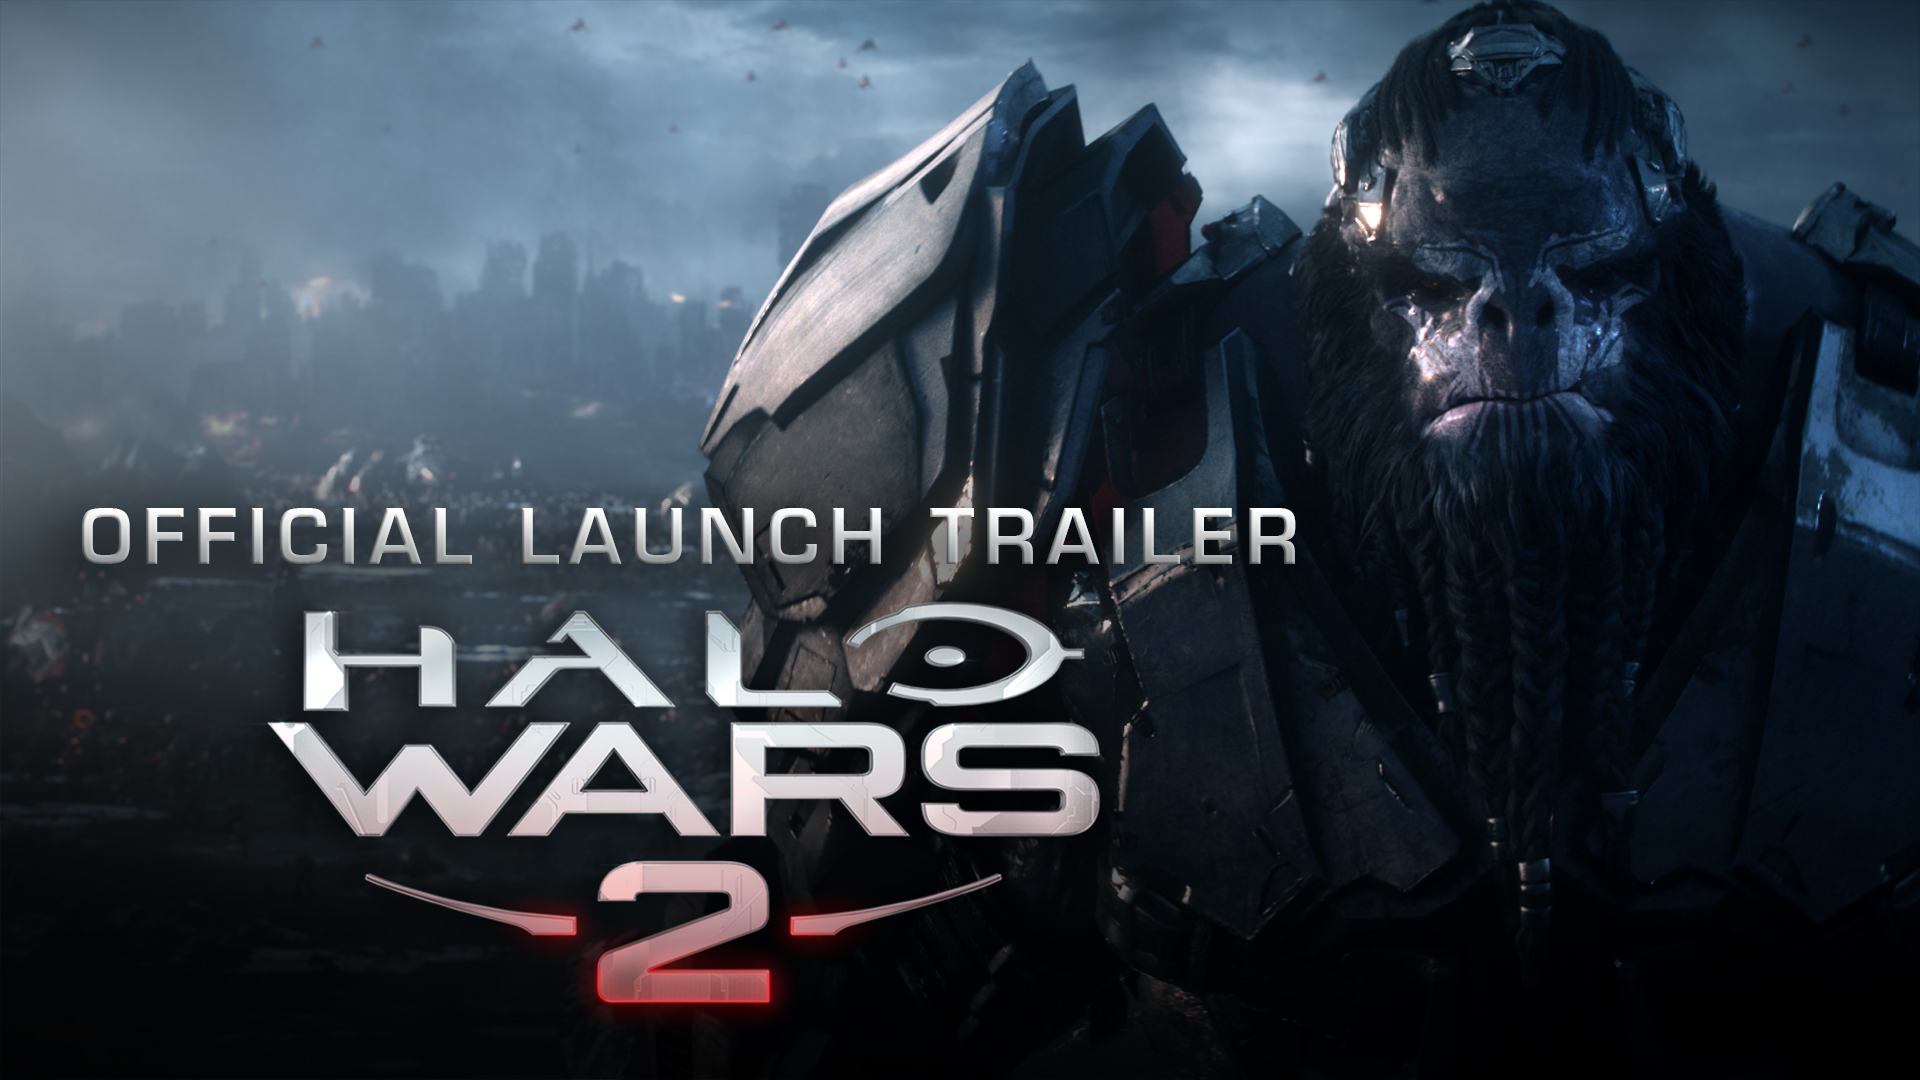 Real Time Strategy returns in the new Halo Wars 2 launch trailer